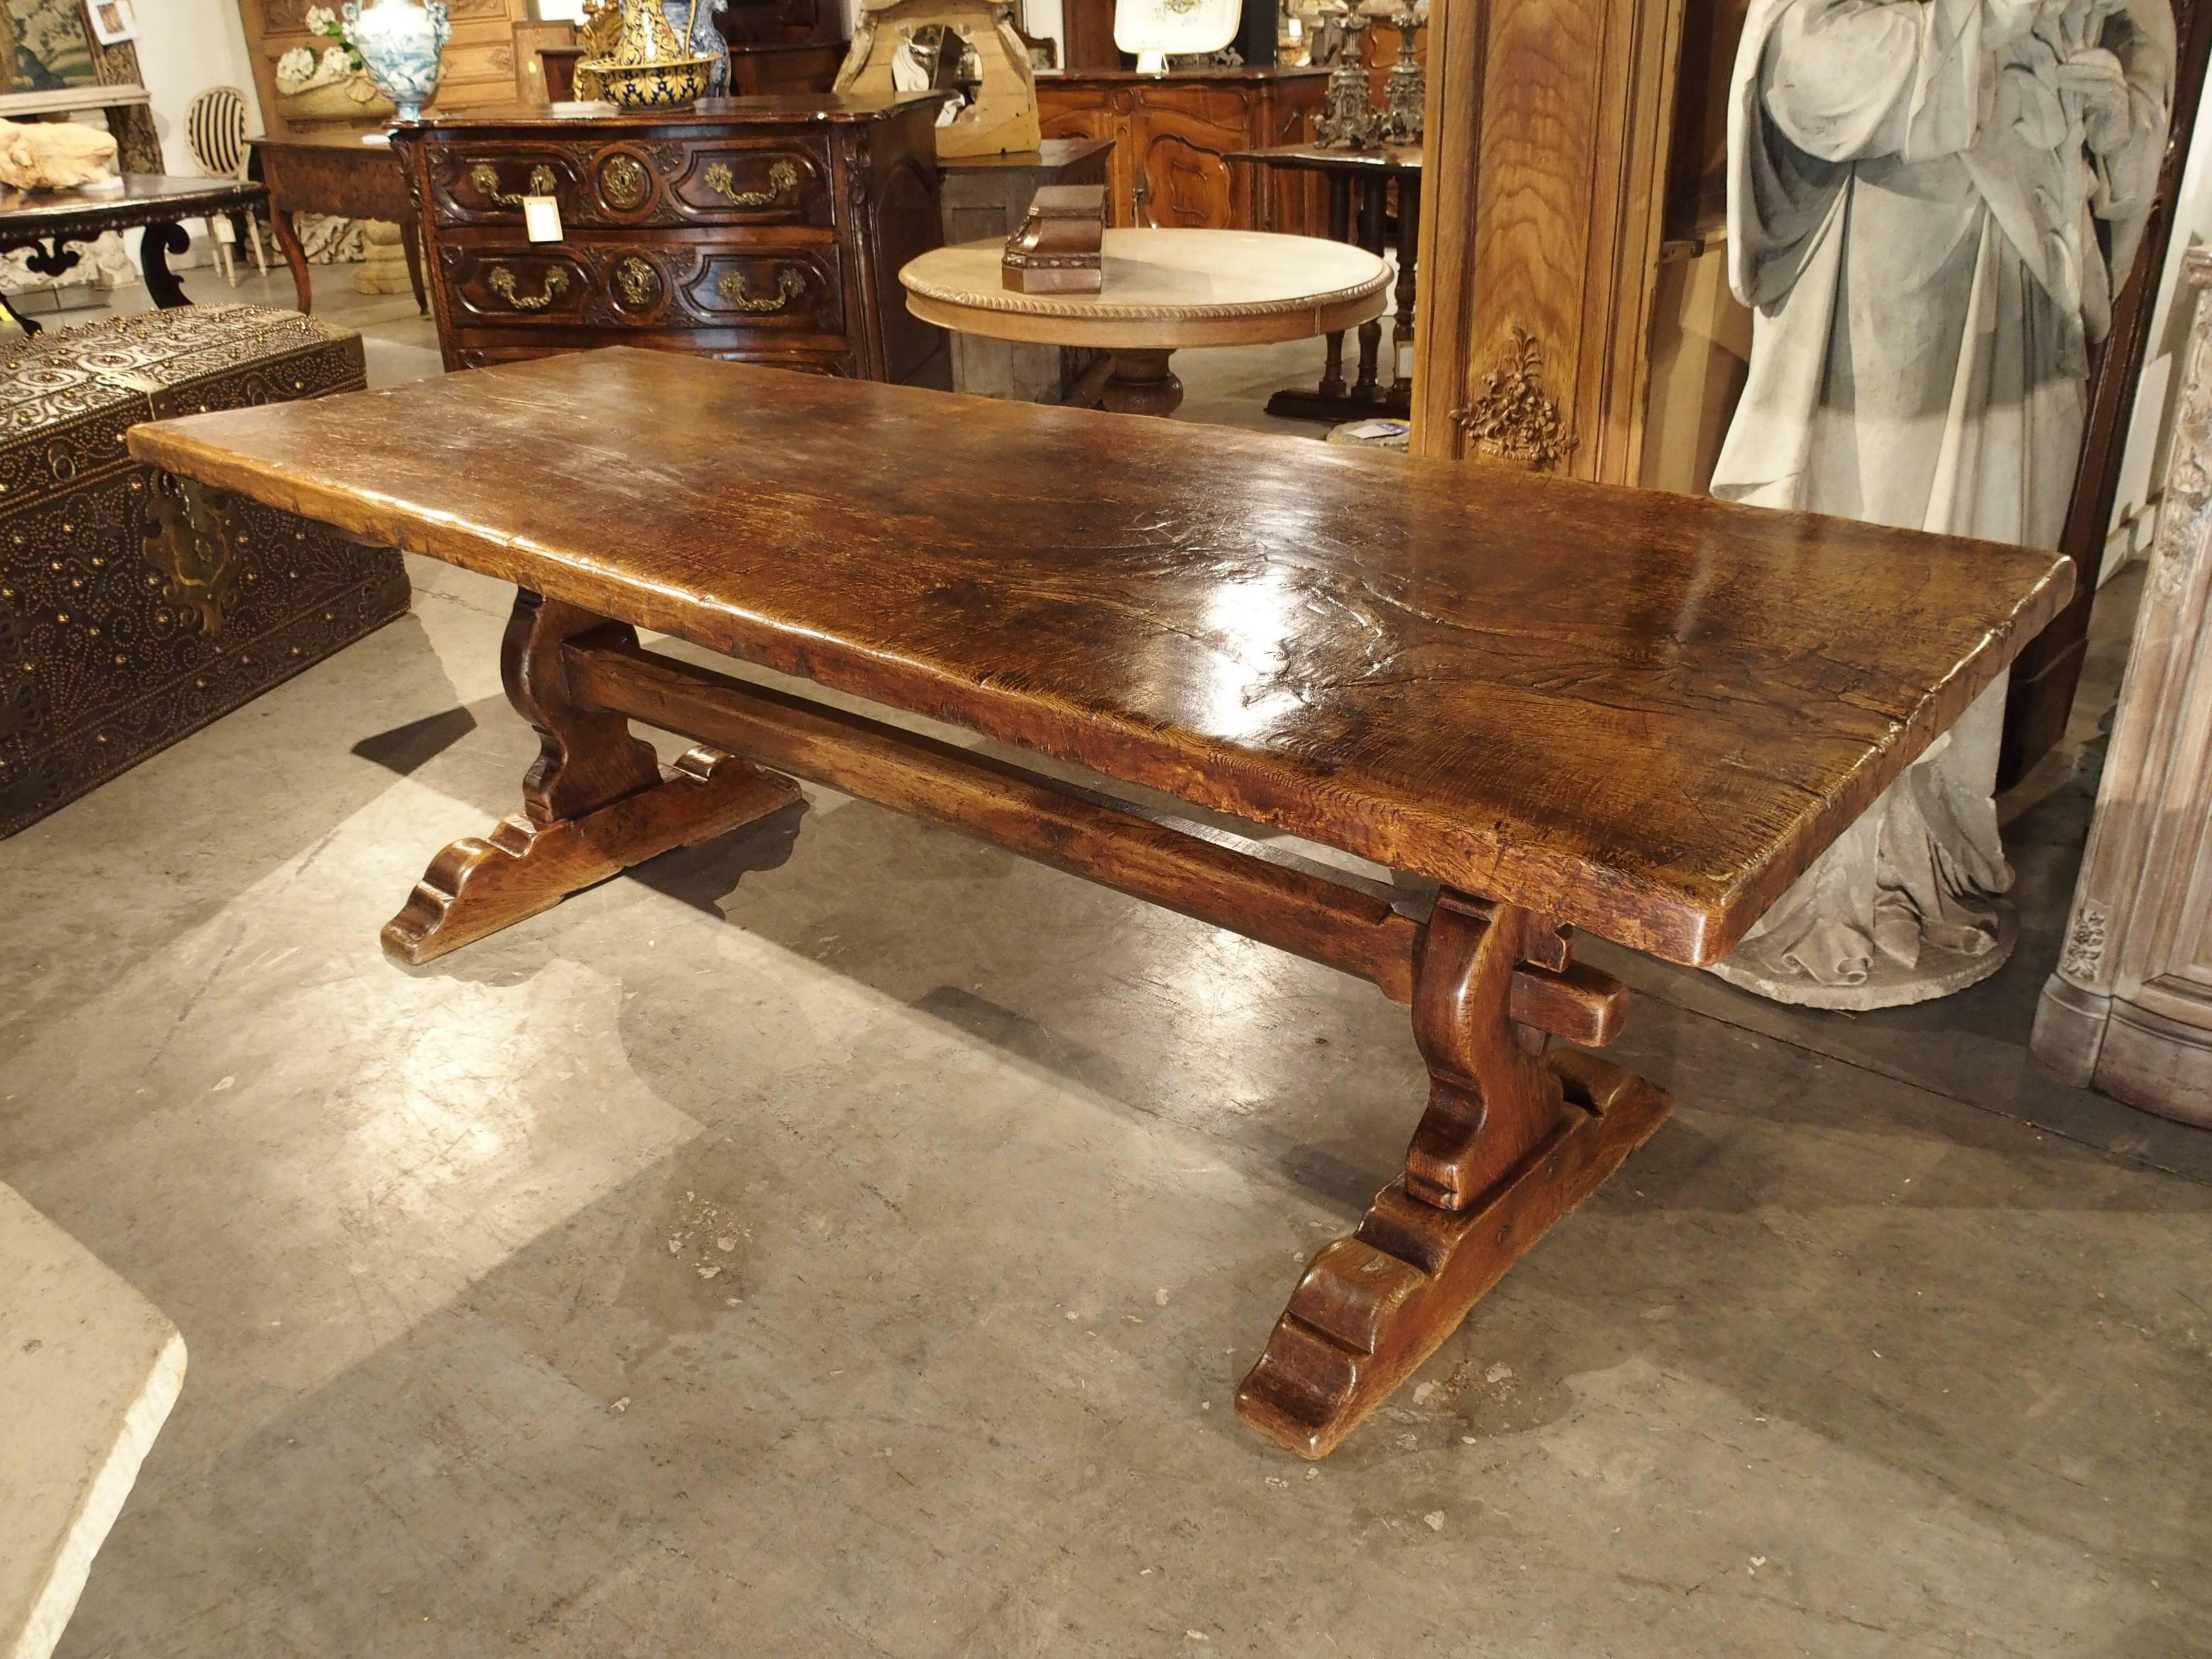 The top of this beautiful table is a single piece of solid French oak! There is a magnificent burl at one end of the top which just adds to its beauty and value. It has been constructed sometime in the late 1800s and possibly older. In the